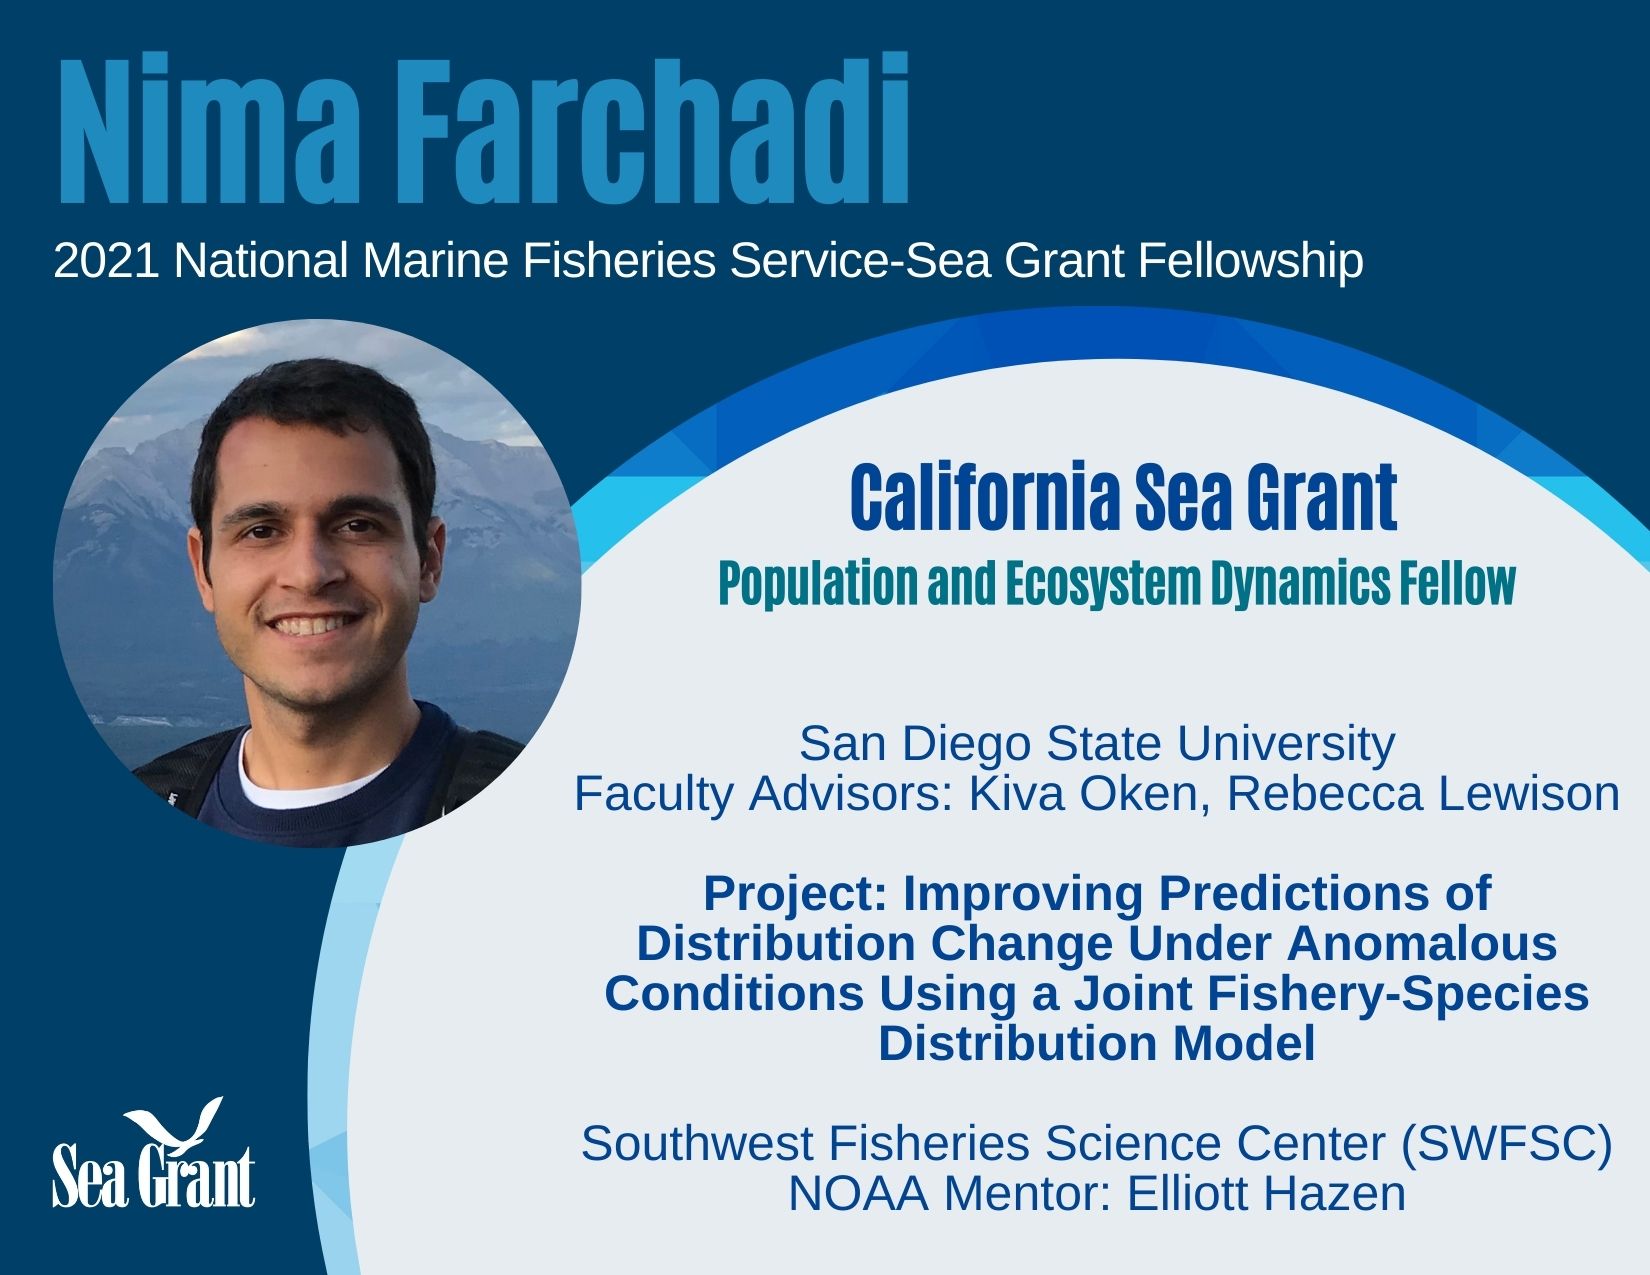 Nima Farchadi - 2021 National Marine Fisheries Service - Sea Grant Fellowship. California Sea Grant Population and Ecosystem Dynamics Fellow. San Diego State University. Faculty Advisors: Kiva Oken, Rebecca Lewison. Project: Improving Predictions of Distributions Change Under Anomalous Conditions Using a Joint Fishery-Species Distribution Model. Southwest Fisheries Science Center (SWFSC) NOAA Mentor: Elliott Hazen